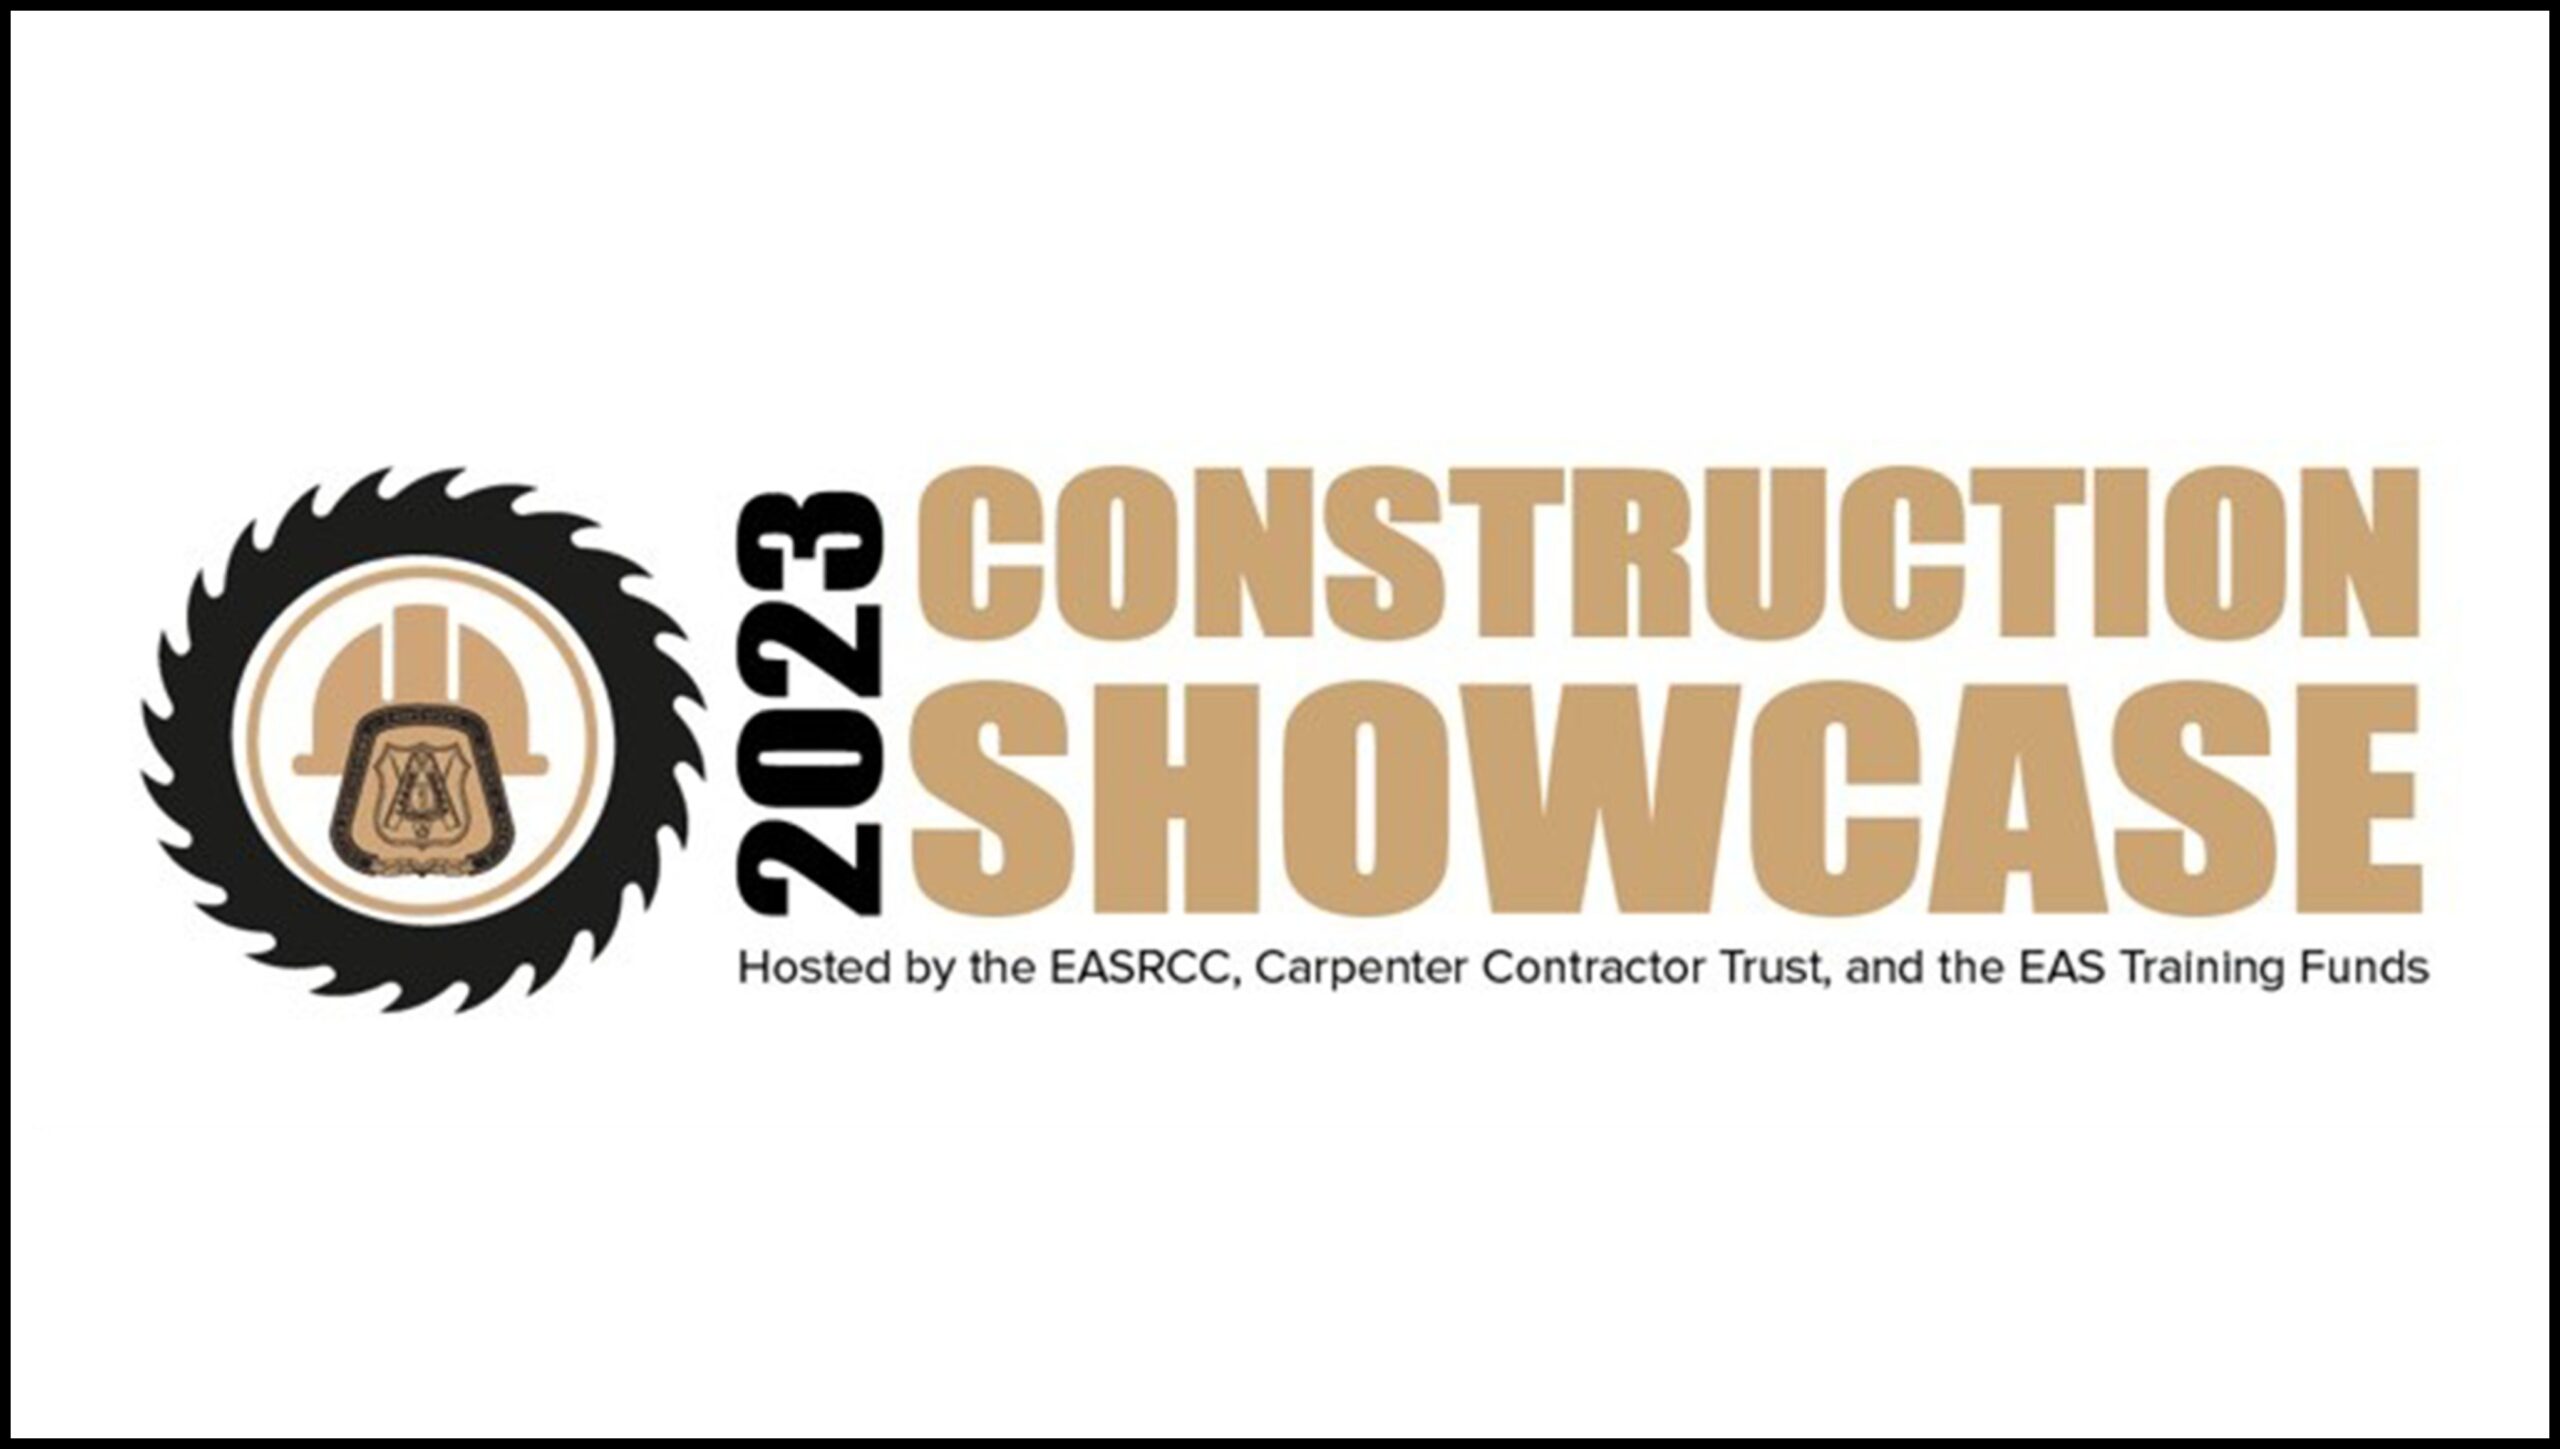 S&A Construction Showcase - Bars, Entertainment & Woodworking